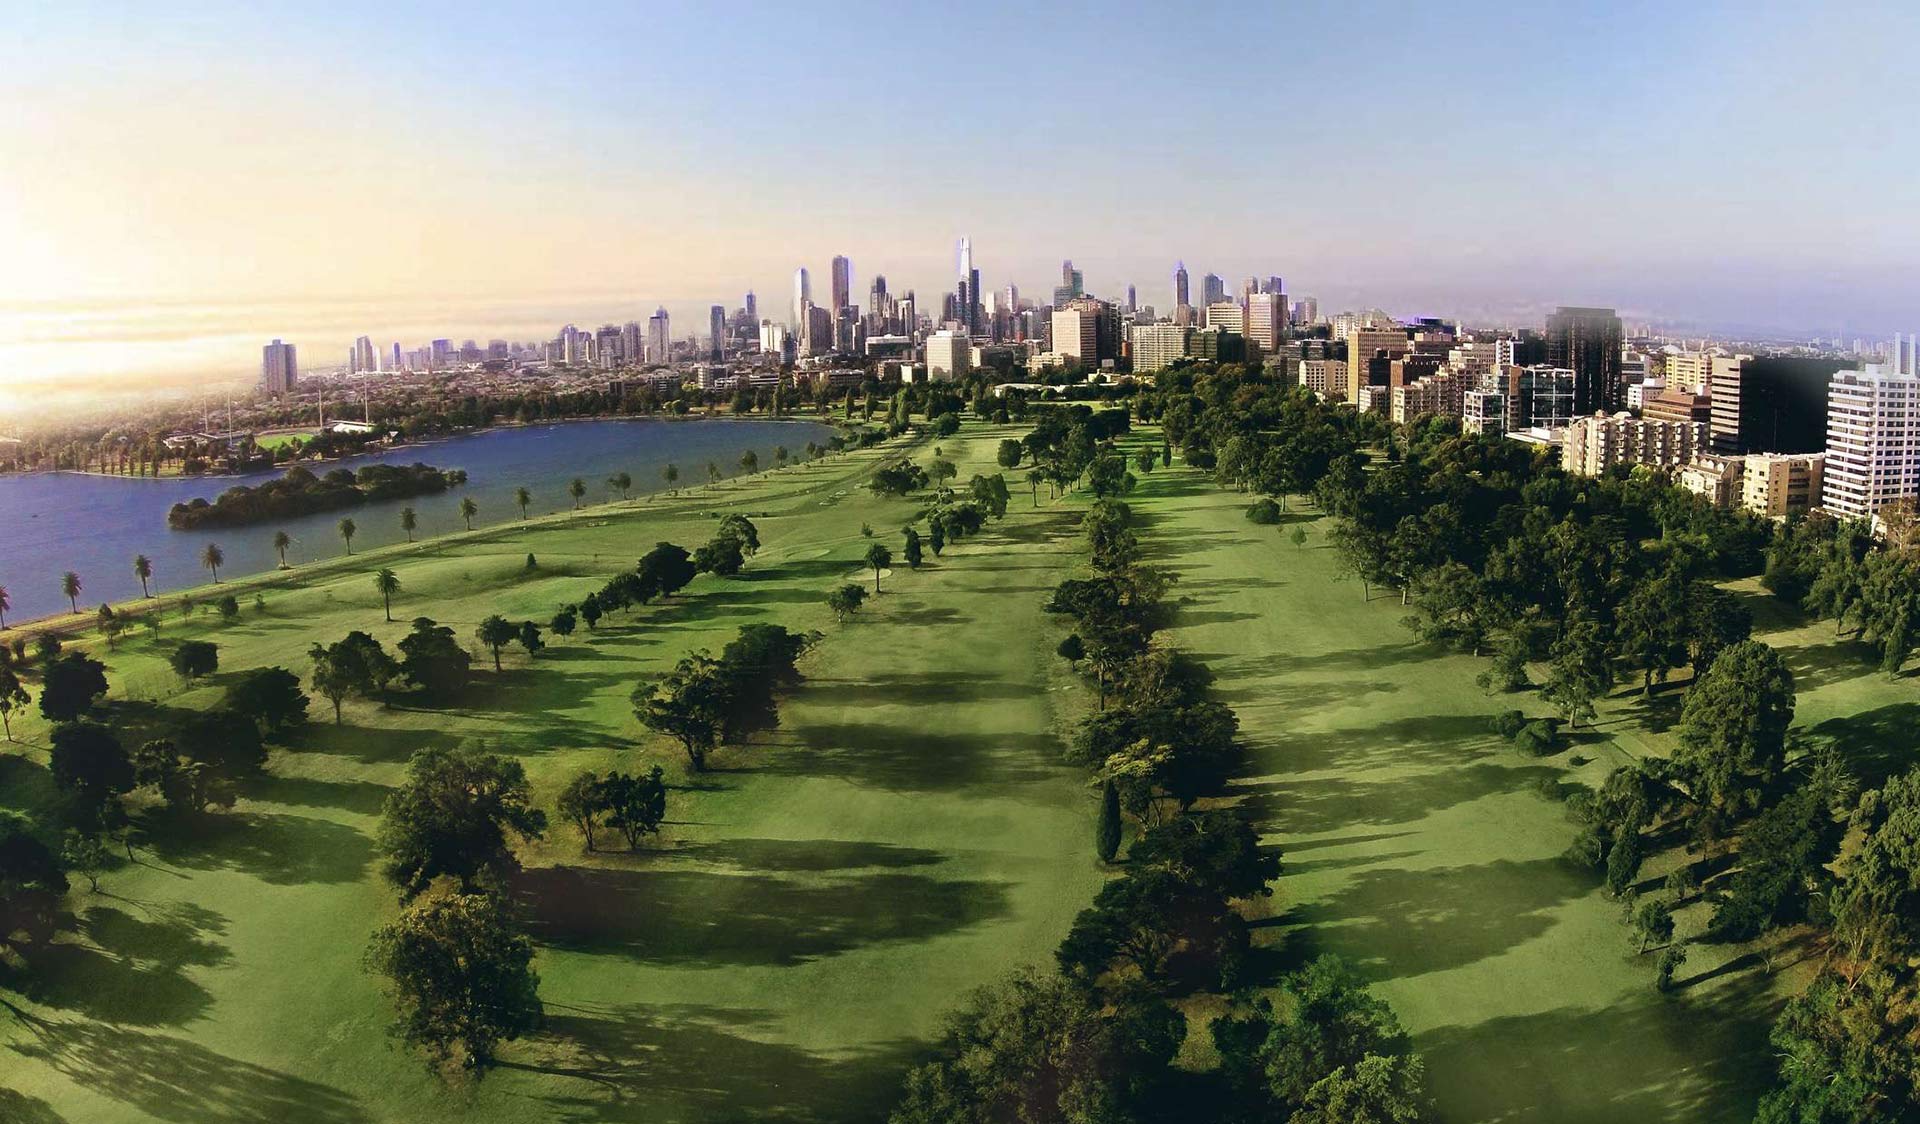 Albert Park Golf Course with views of Melbourne's CBD skyline in the background. 